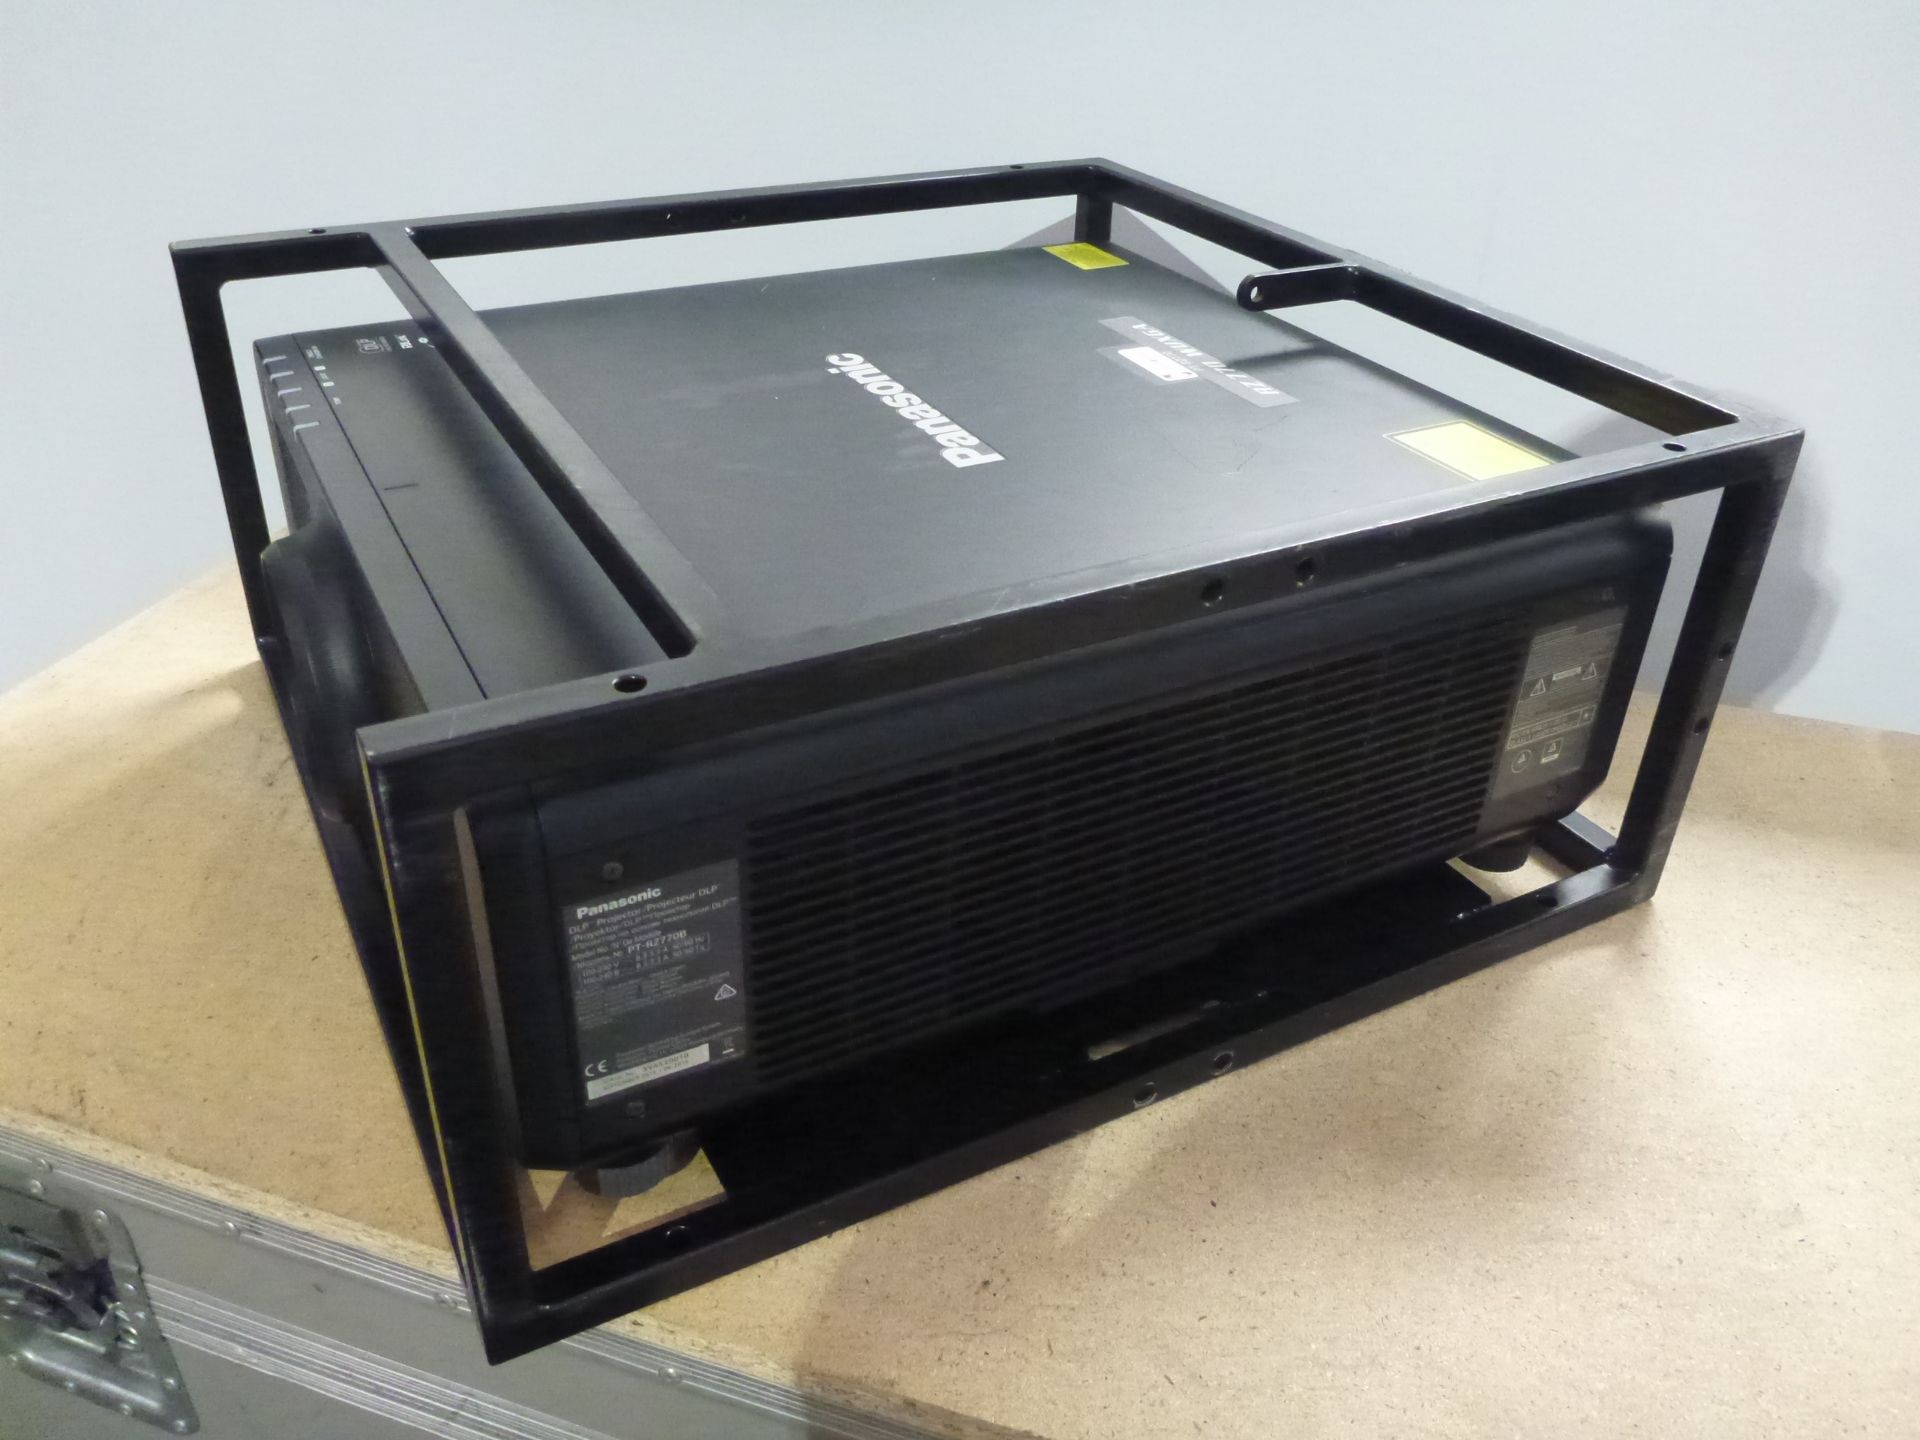 Panasonic Laser Projector, Model PT-RZ770, S/N SV6520010, YOM 2016, In flight case with standard 1. - Image 2 of 11